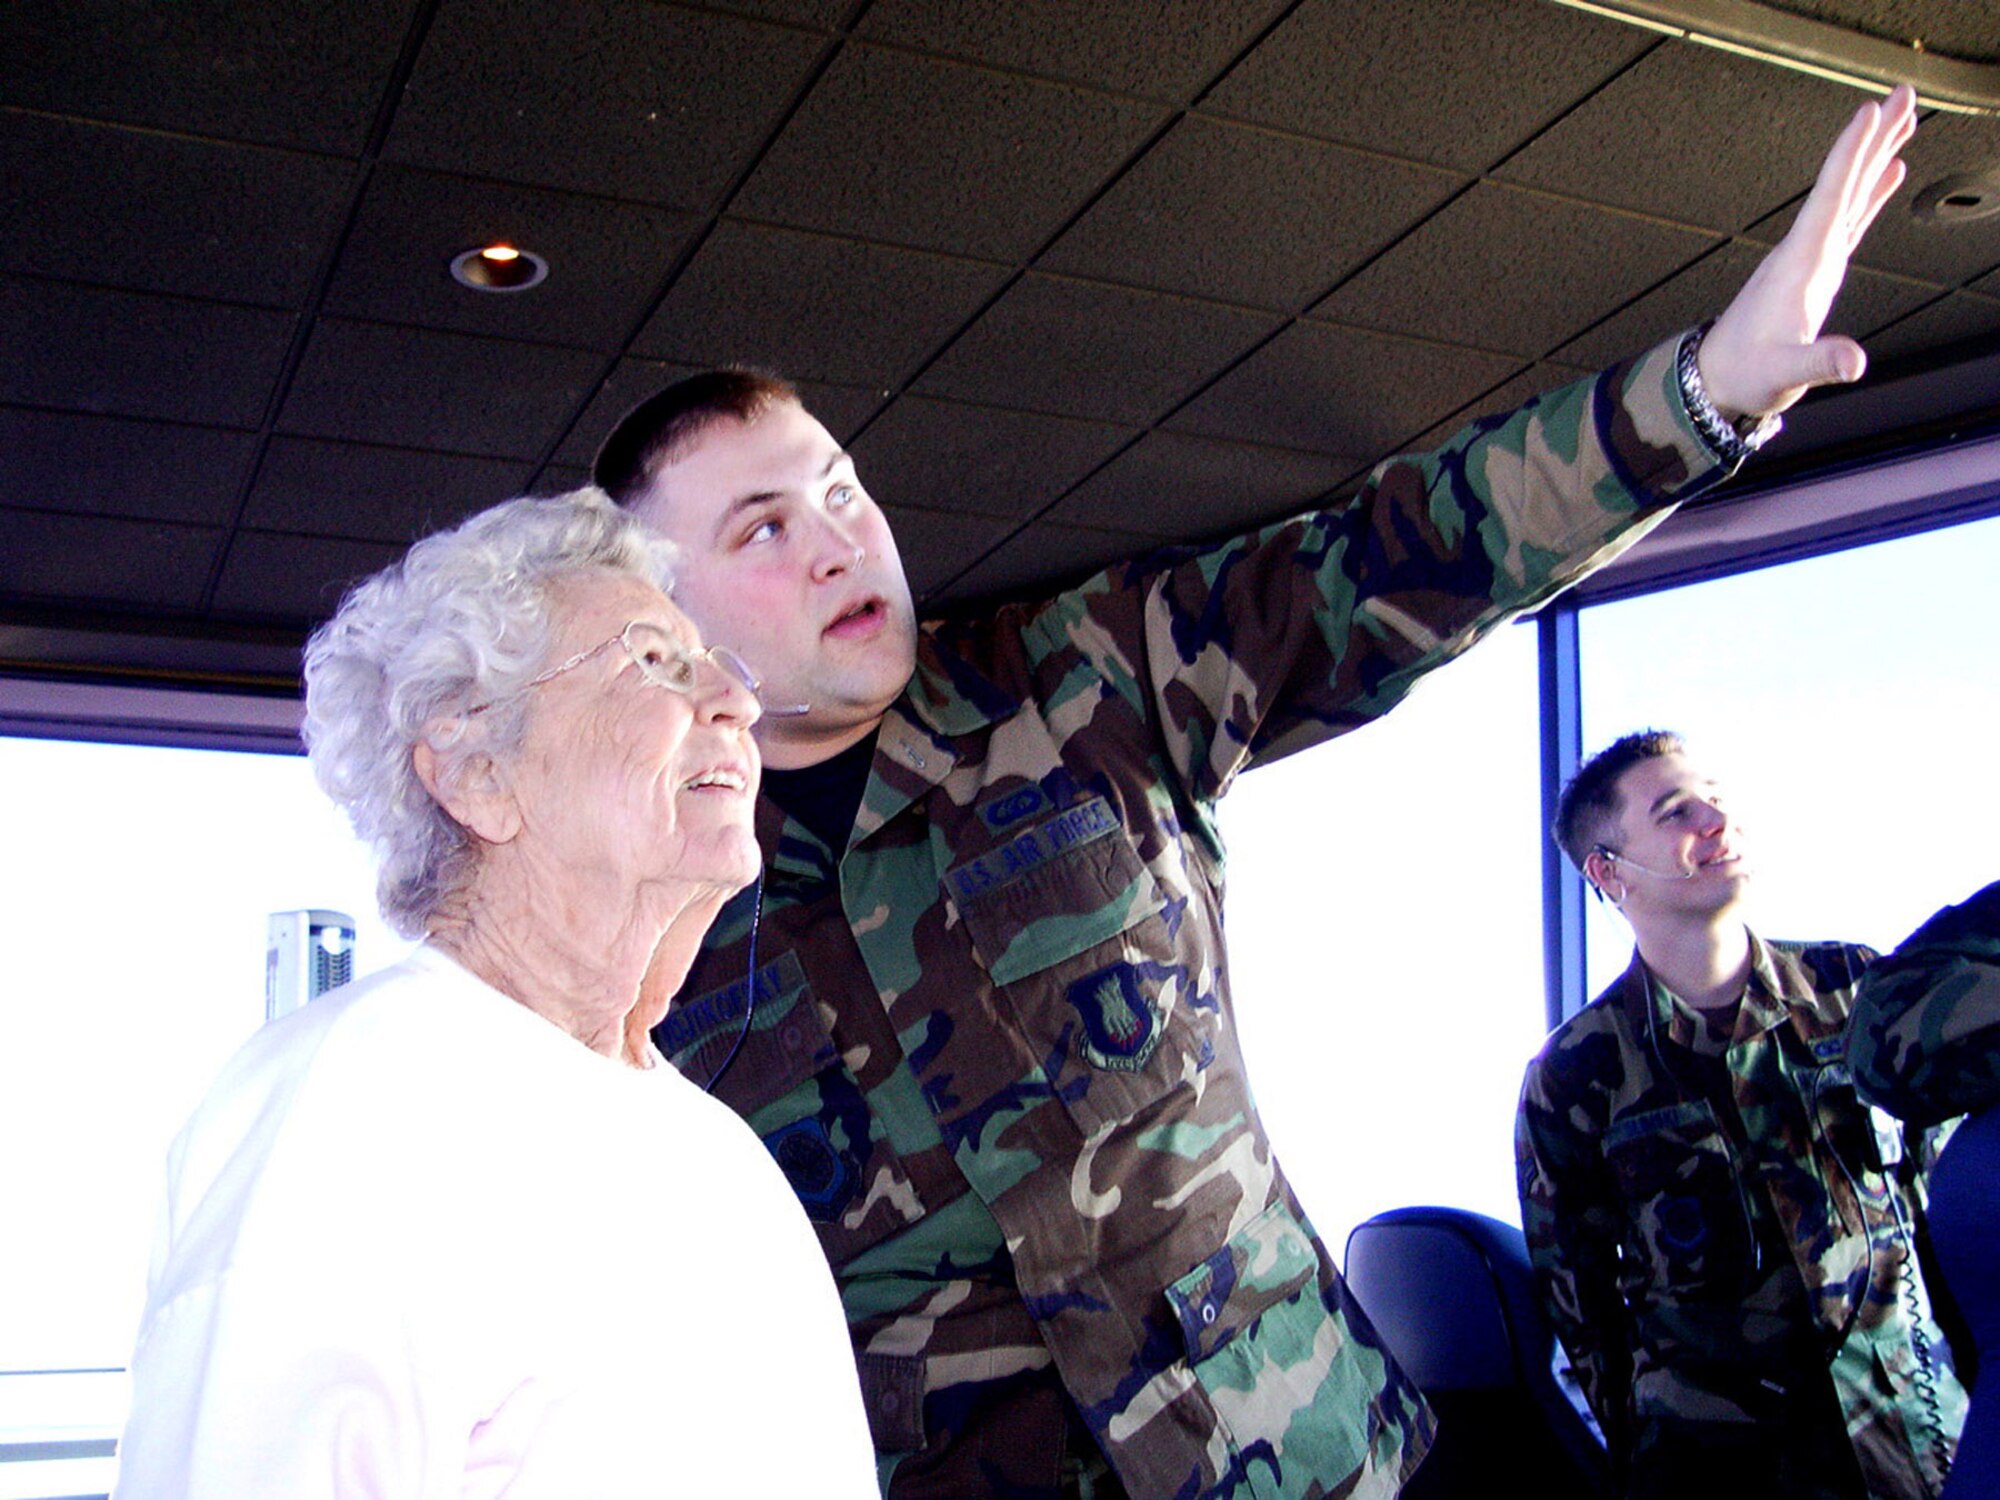 Senior Airman Robert Vojtkofsky, 22nd Operations Support Squadron air traffic controller, shows Mary Chance VanScyoc, the first civilian, female air traffic controller in the United States, around McConnell’s air traffic control tower Feb. 28. Airman Vojtkofsky gave Ms. VanScyoc a tour of the tower in honor of Women’s History Month, which is March. Ms. VanScyoc began here career as an air traffic controller in June, 1942, at the Denver Airway Traffic Control Center in Denver, Colo. She also worked as a controller in Wichita from 1944 to 1945. Today, she has a job at the Kansas Aviation Museum in Wichita. (Air Force photo by Senior Airman Amanda Currier)                               